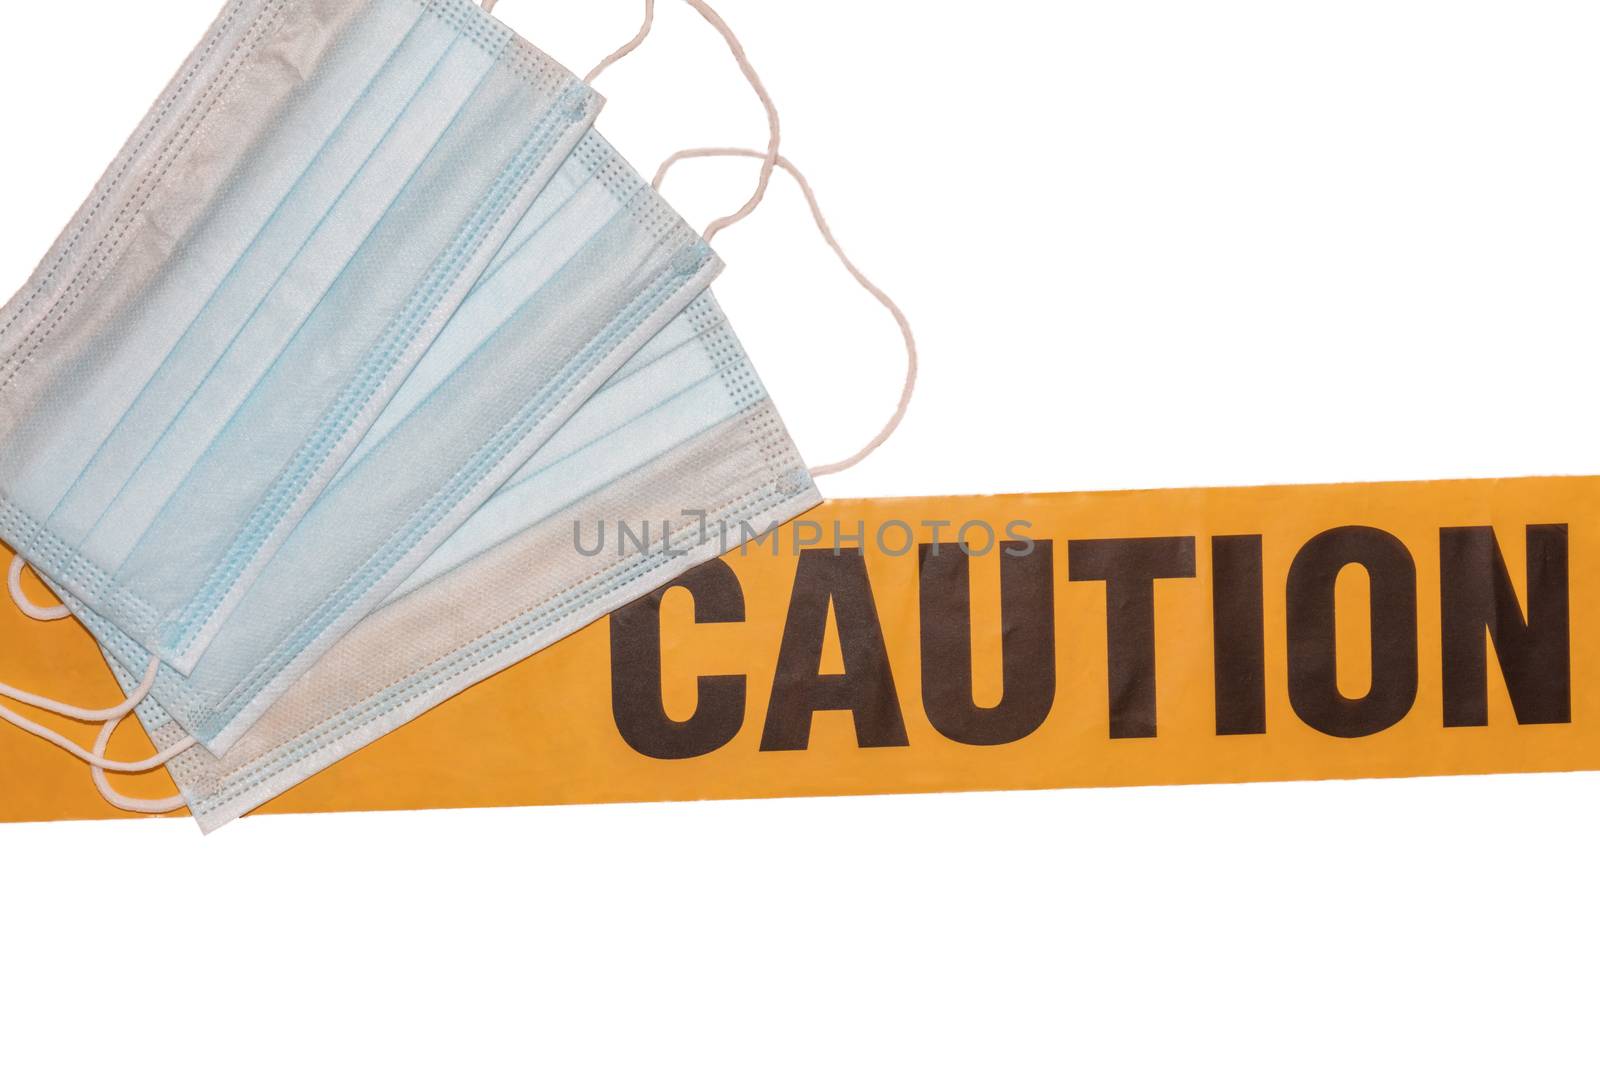 Facial protective masks on top of yellow caution tape. Isolated. White background. Protection against viruses and bacteria. PPE. Quarantine area.